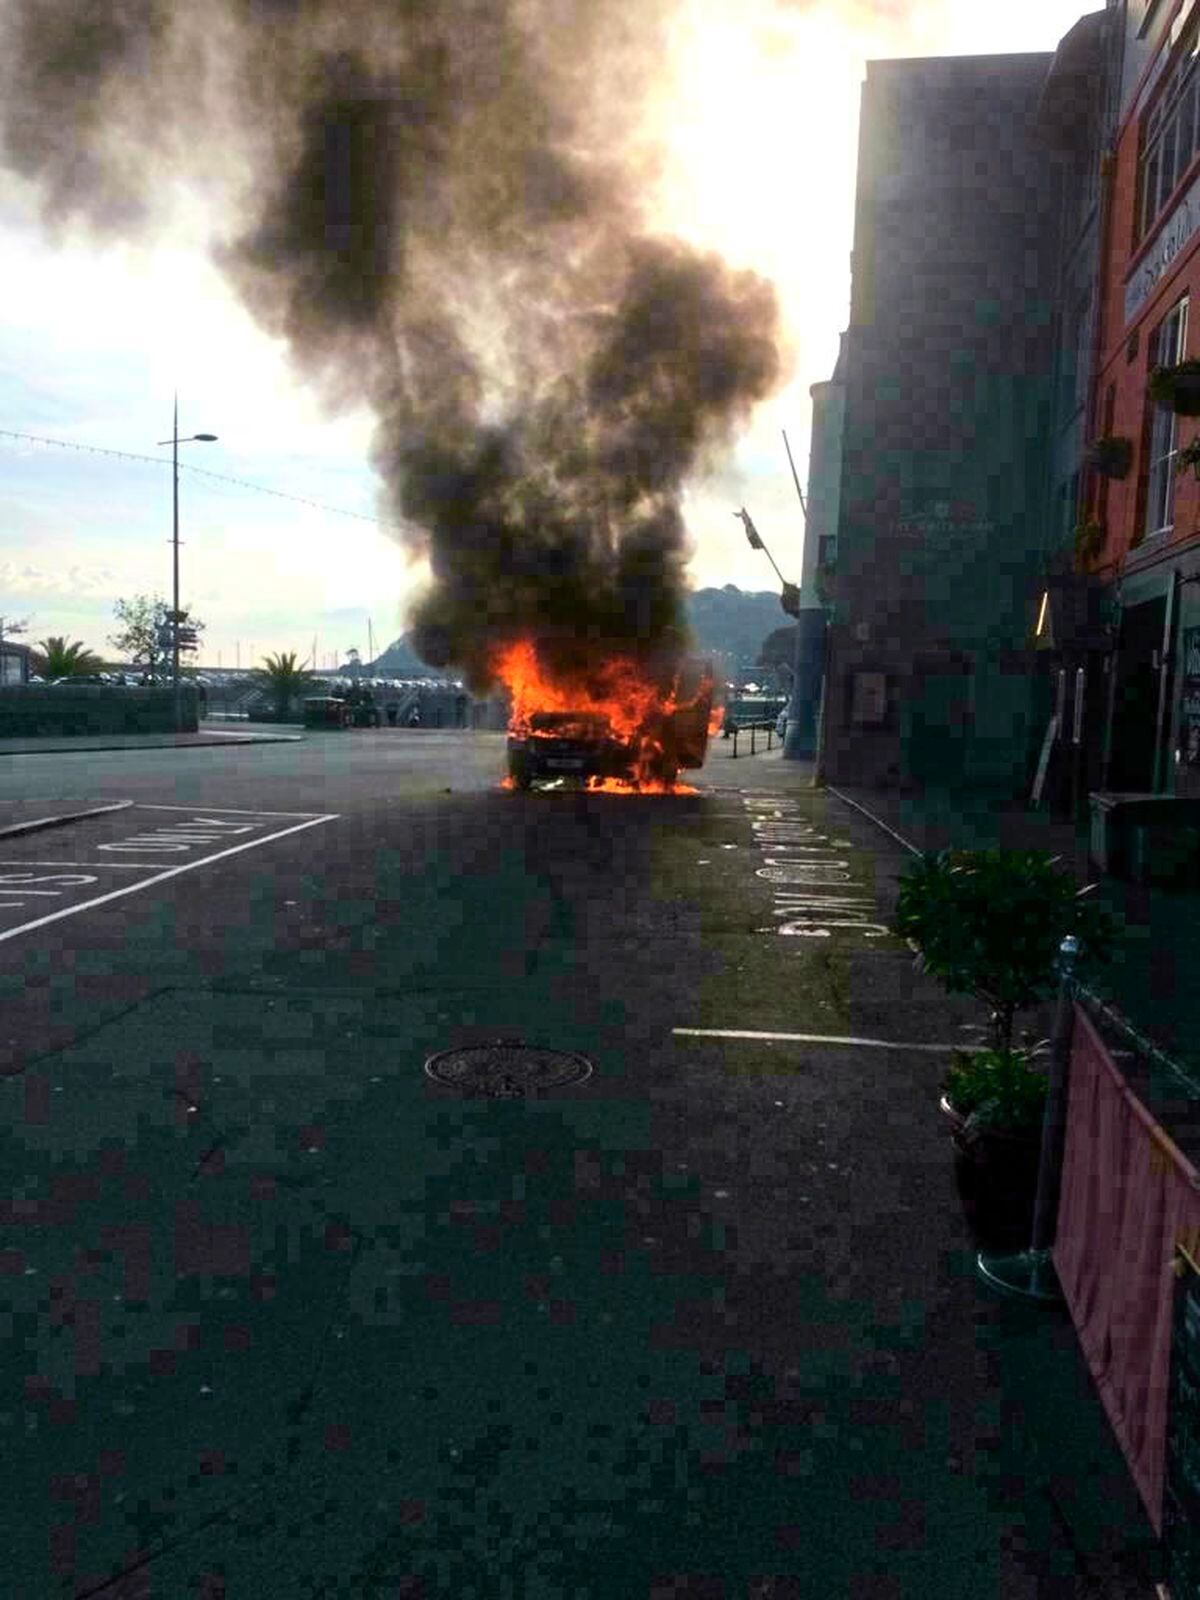 Cimandis lorry on fire in Town. Pic supplied. (23199047)